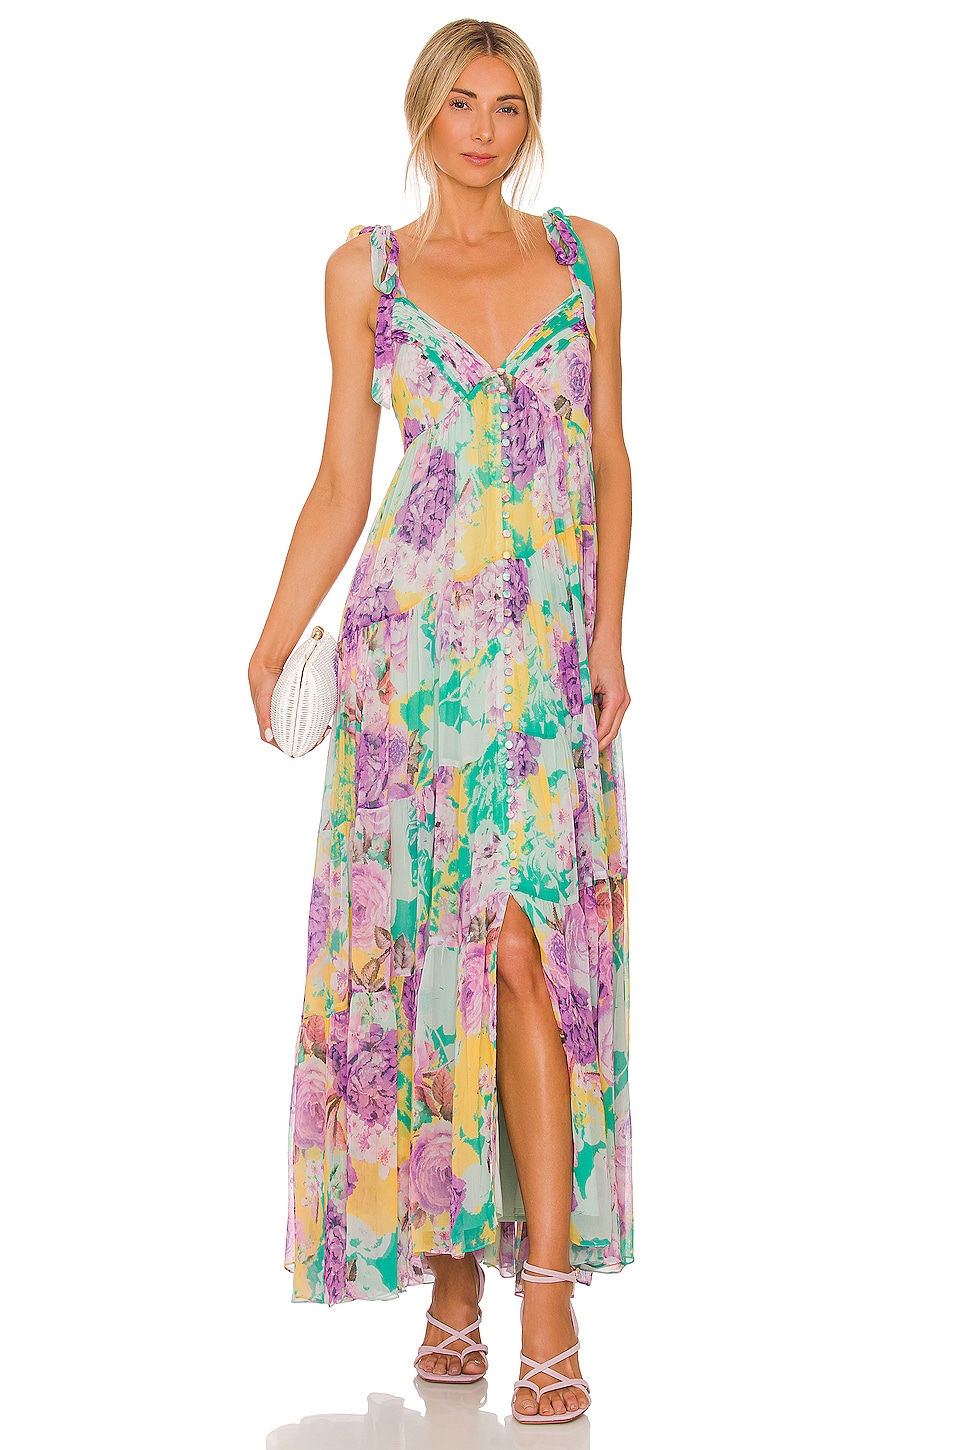 ROCOCO SAND Ivy Maxi Dress in Butter Yellow & Lavender | REVOLVE